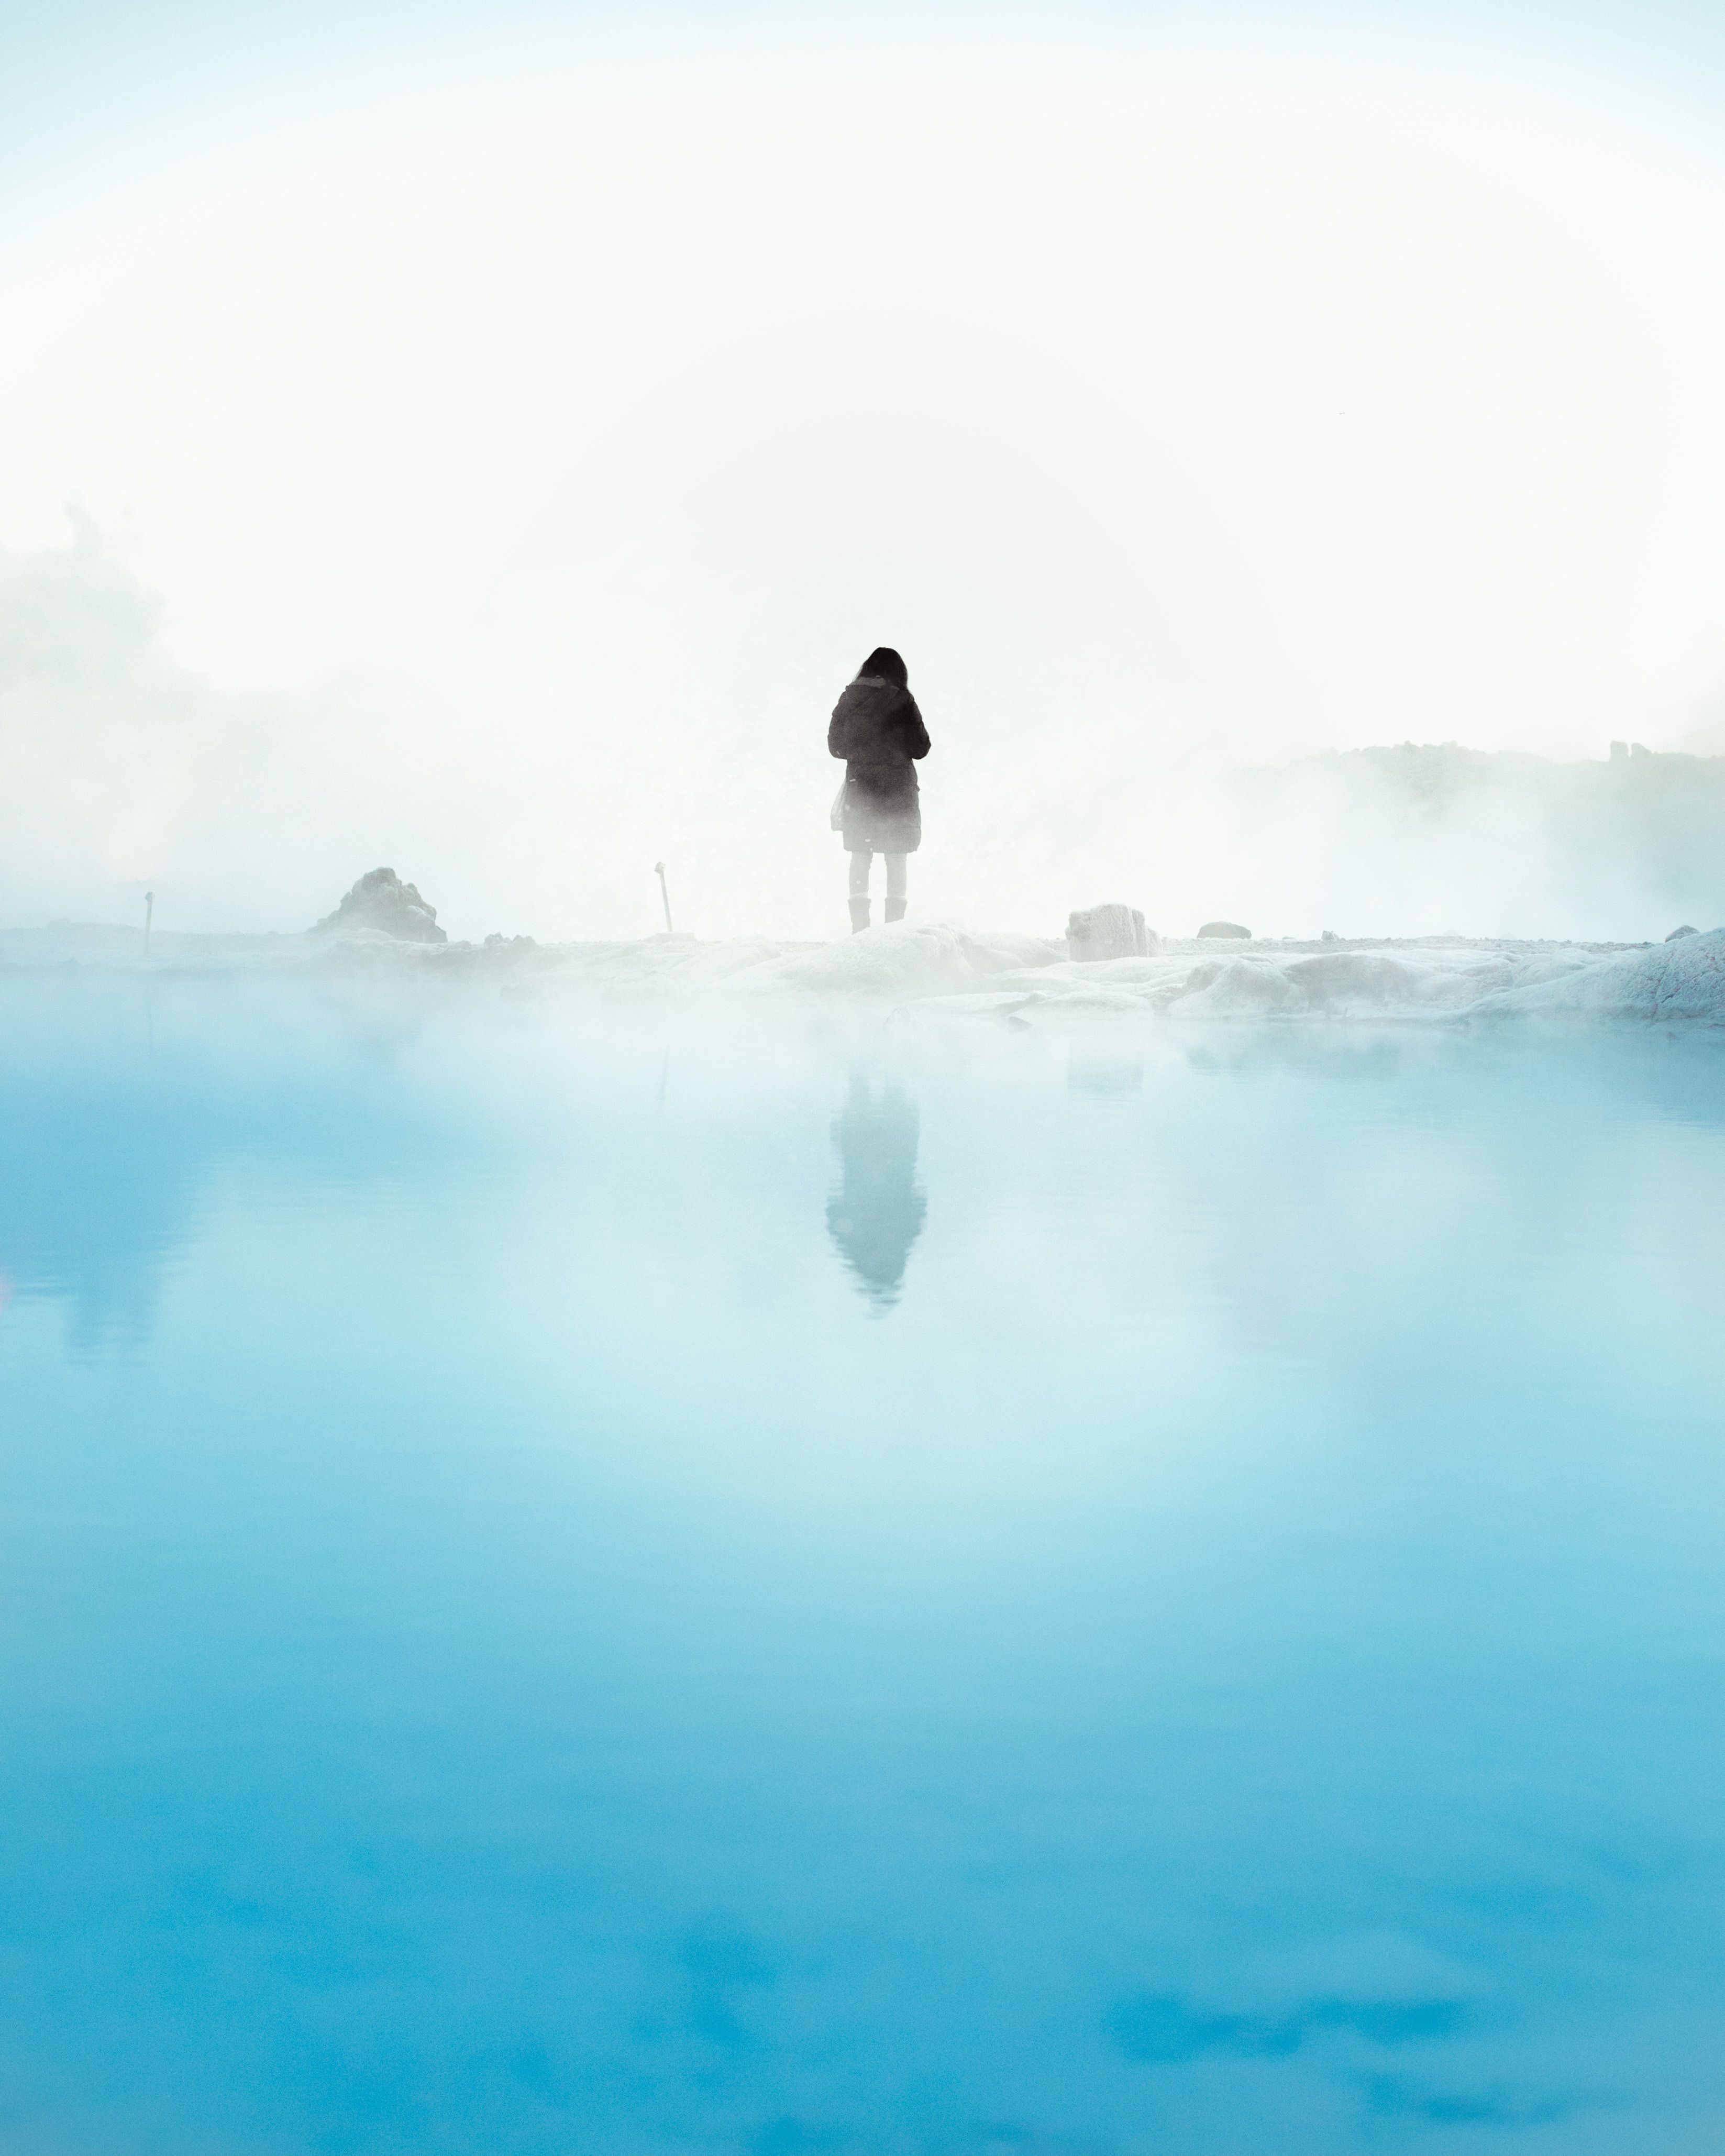 A person standing on the edge of water - Fog